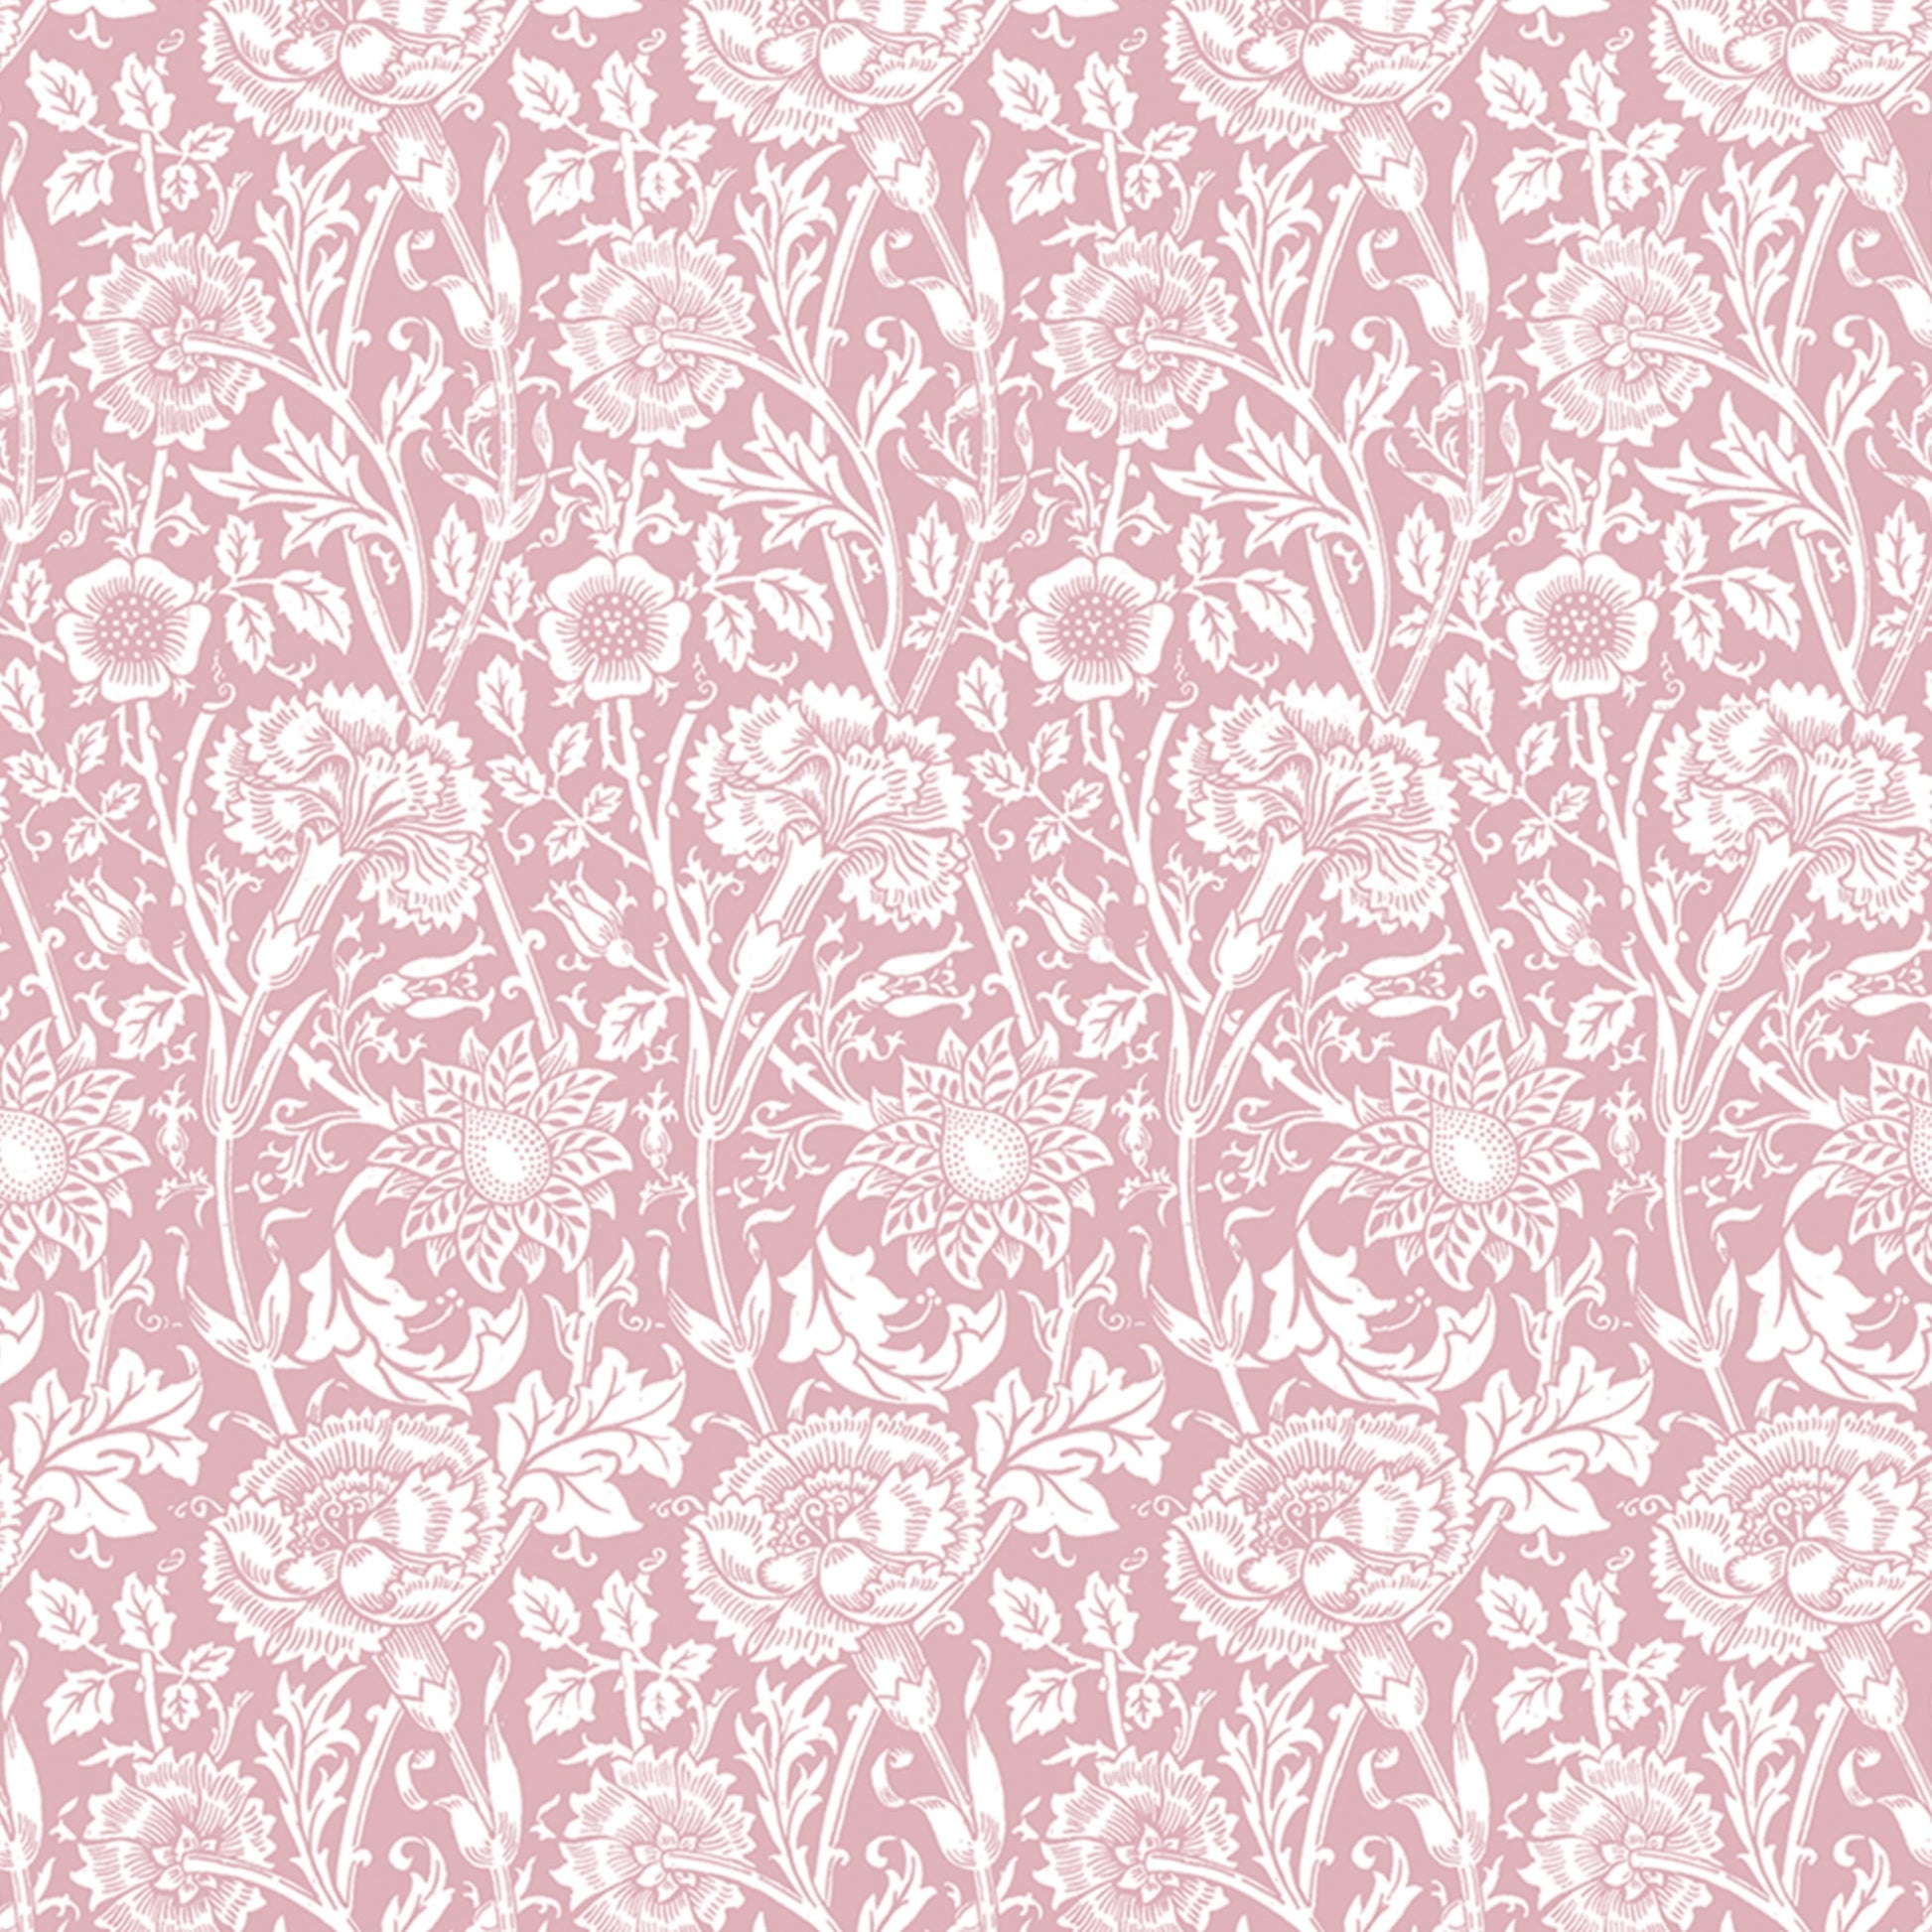 Simply Drawer Liners ROSE fragrance SCENTED Drawer Liners in PINK William Morris Design. Made in Britain.